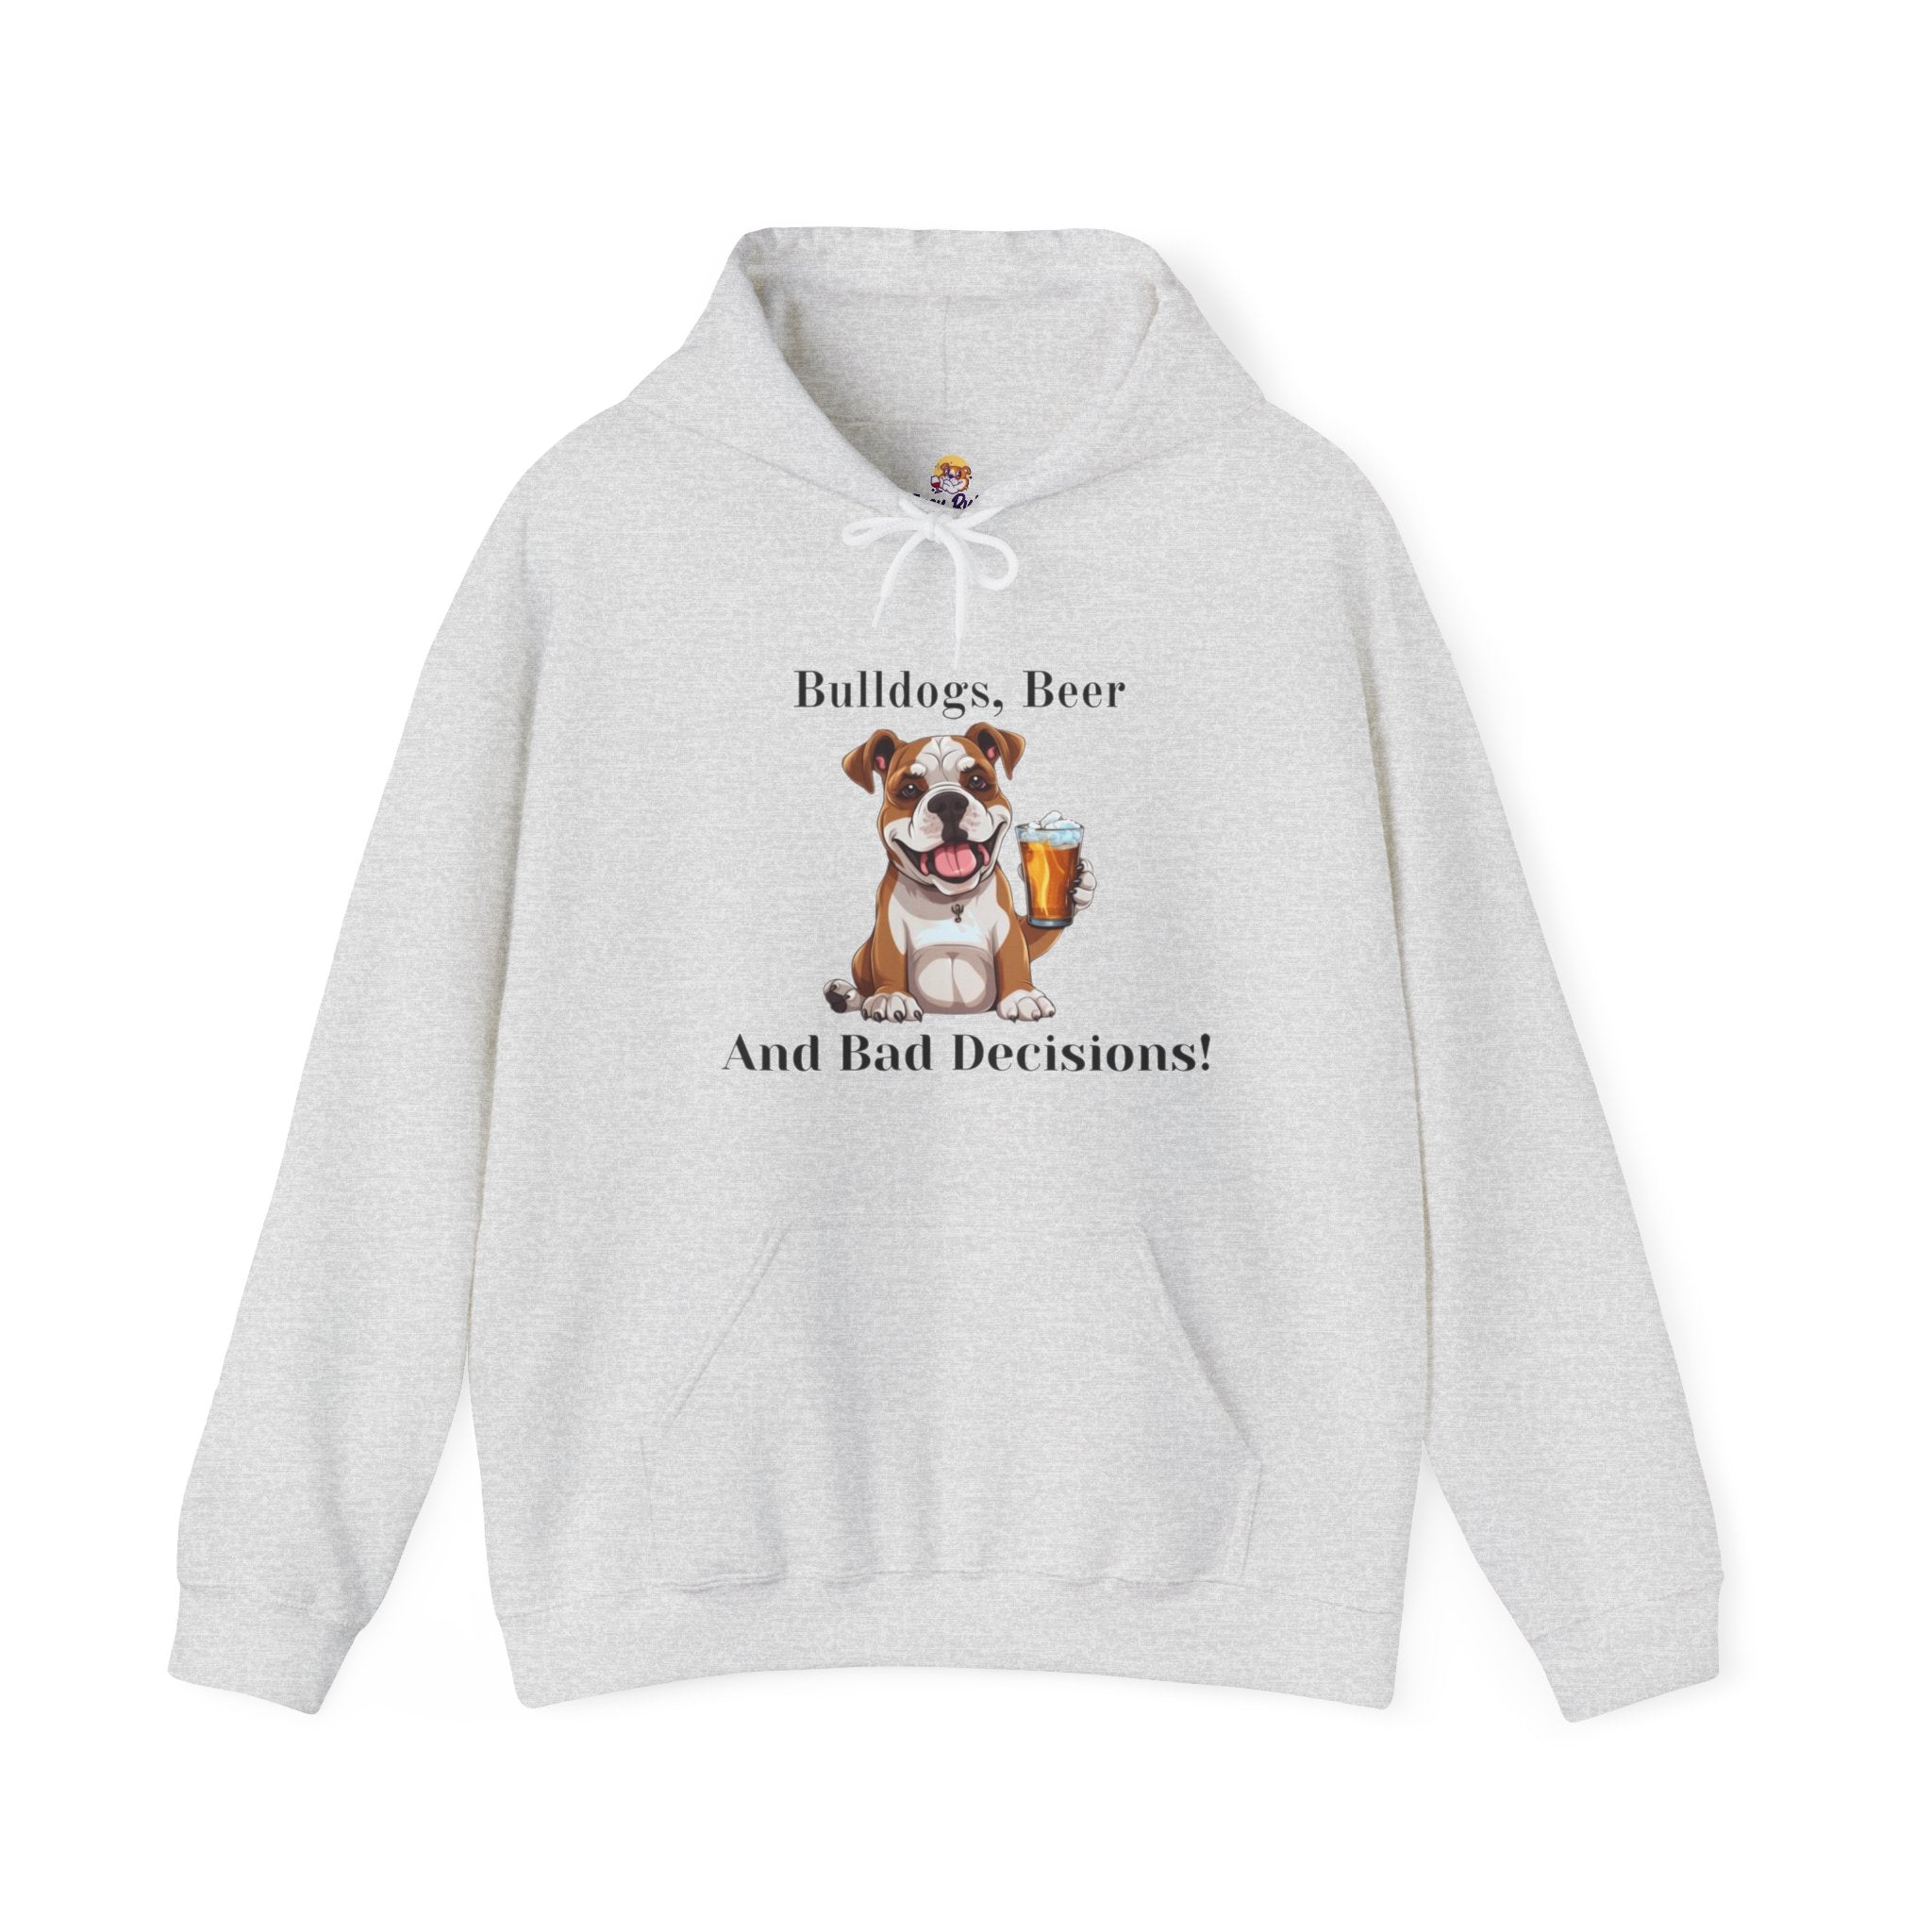 Bulldogs, Beer, and Bad Decisions" Hoodie - Your Go-To Gear for Mischievous Times! (American/White)